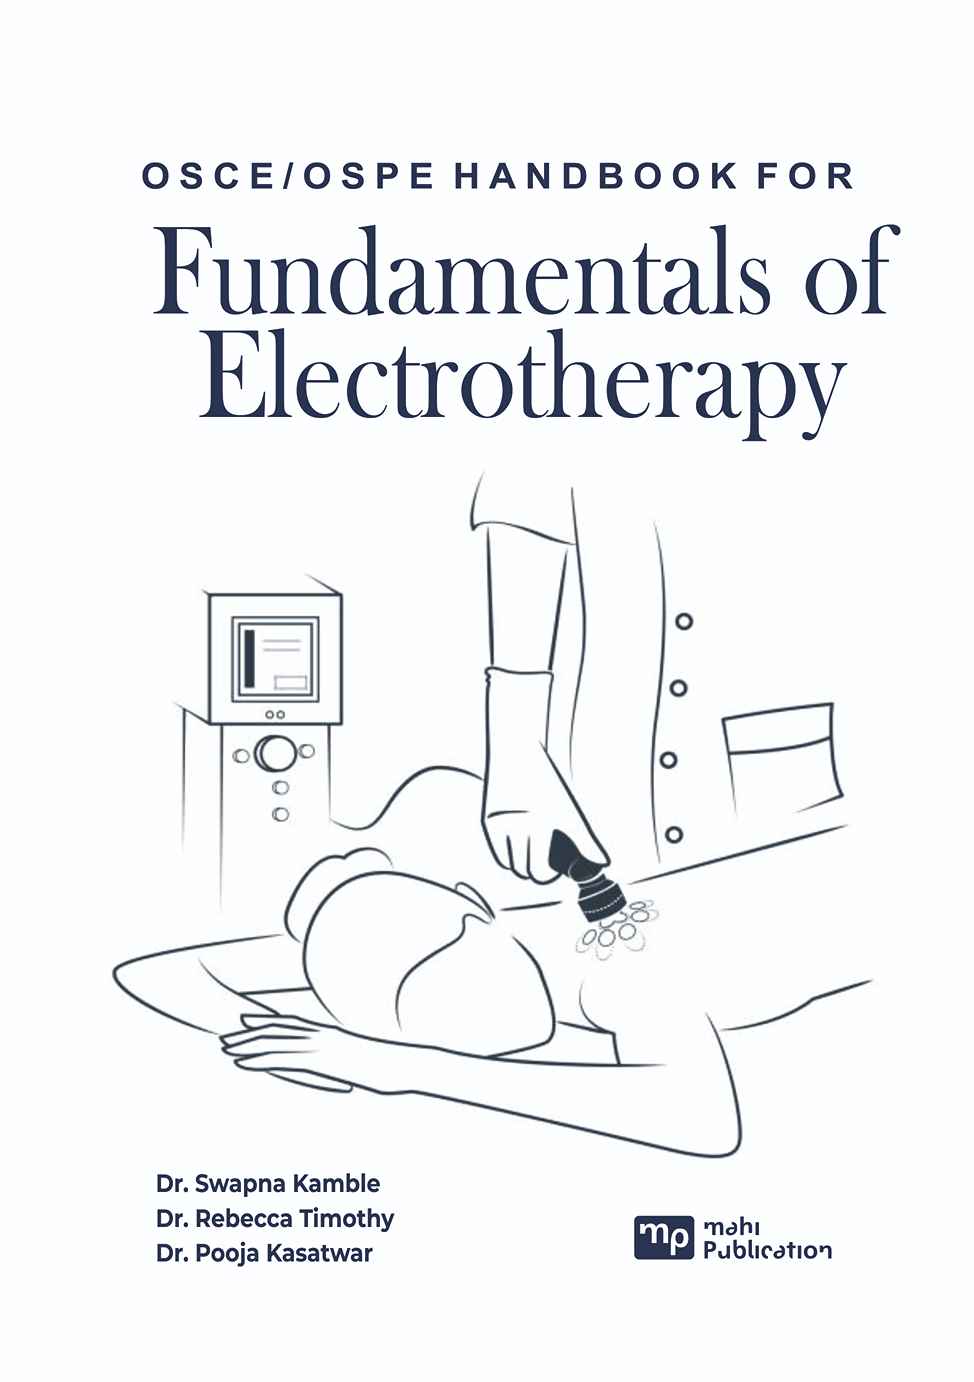 OSCE/OSPE Handbook for Fundamentals of Electrotherapy